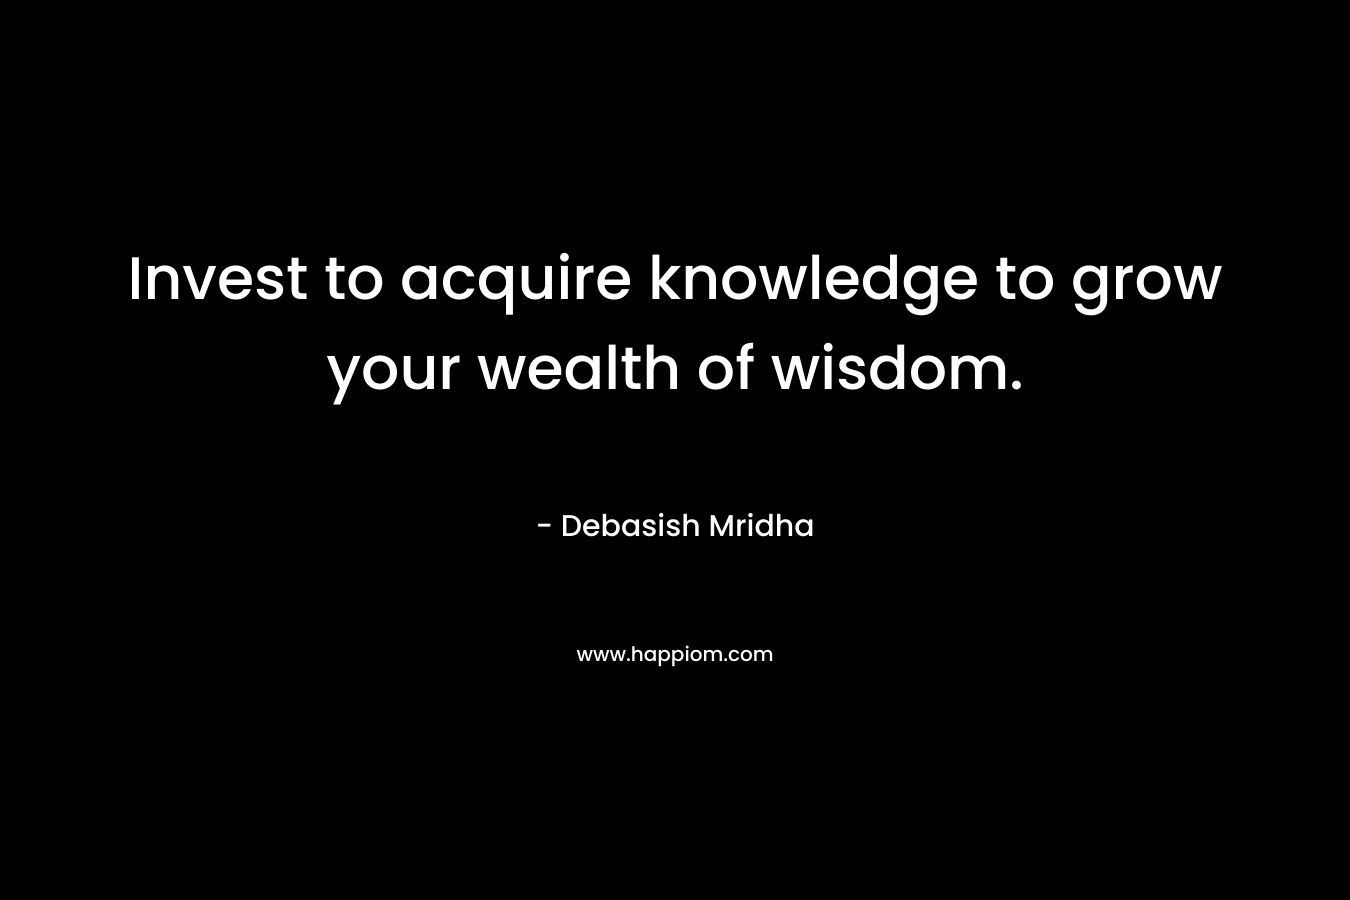 Invest to acquire knowledge to grow your wealth of wisdom. – Debasish Mridha